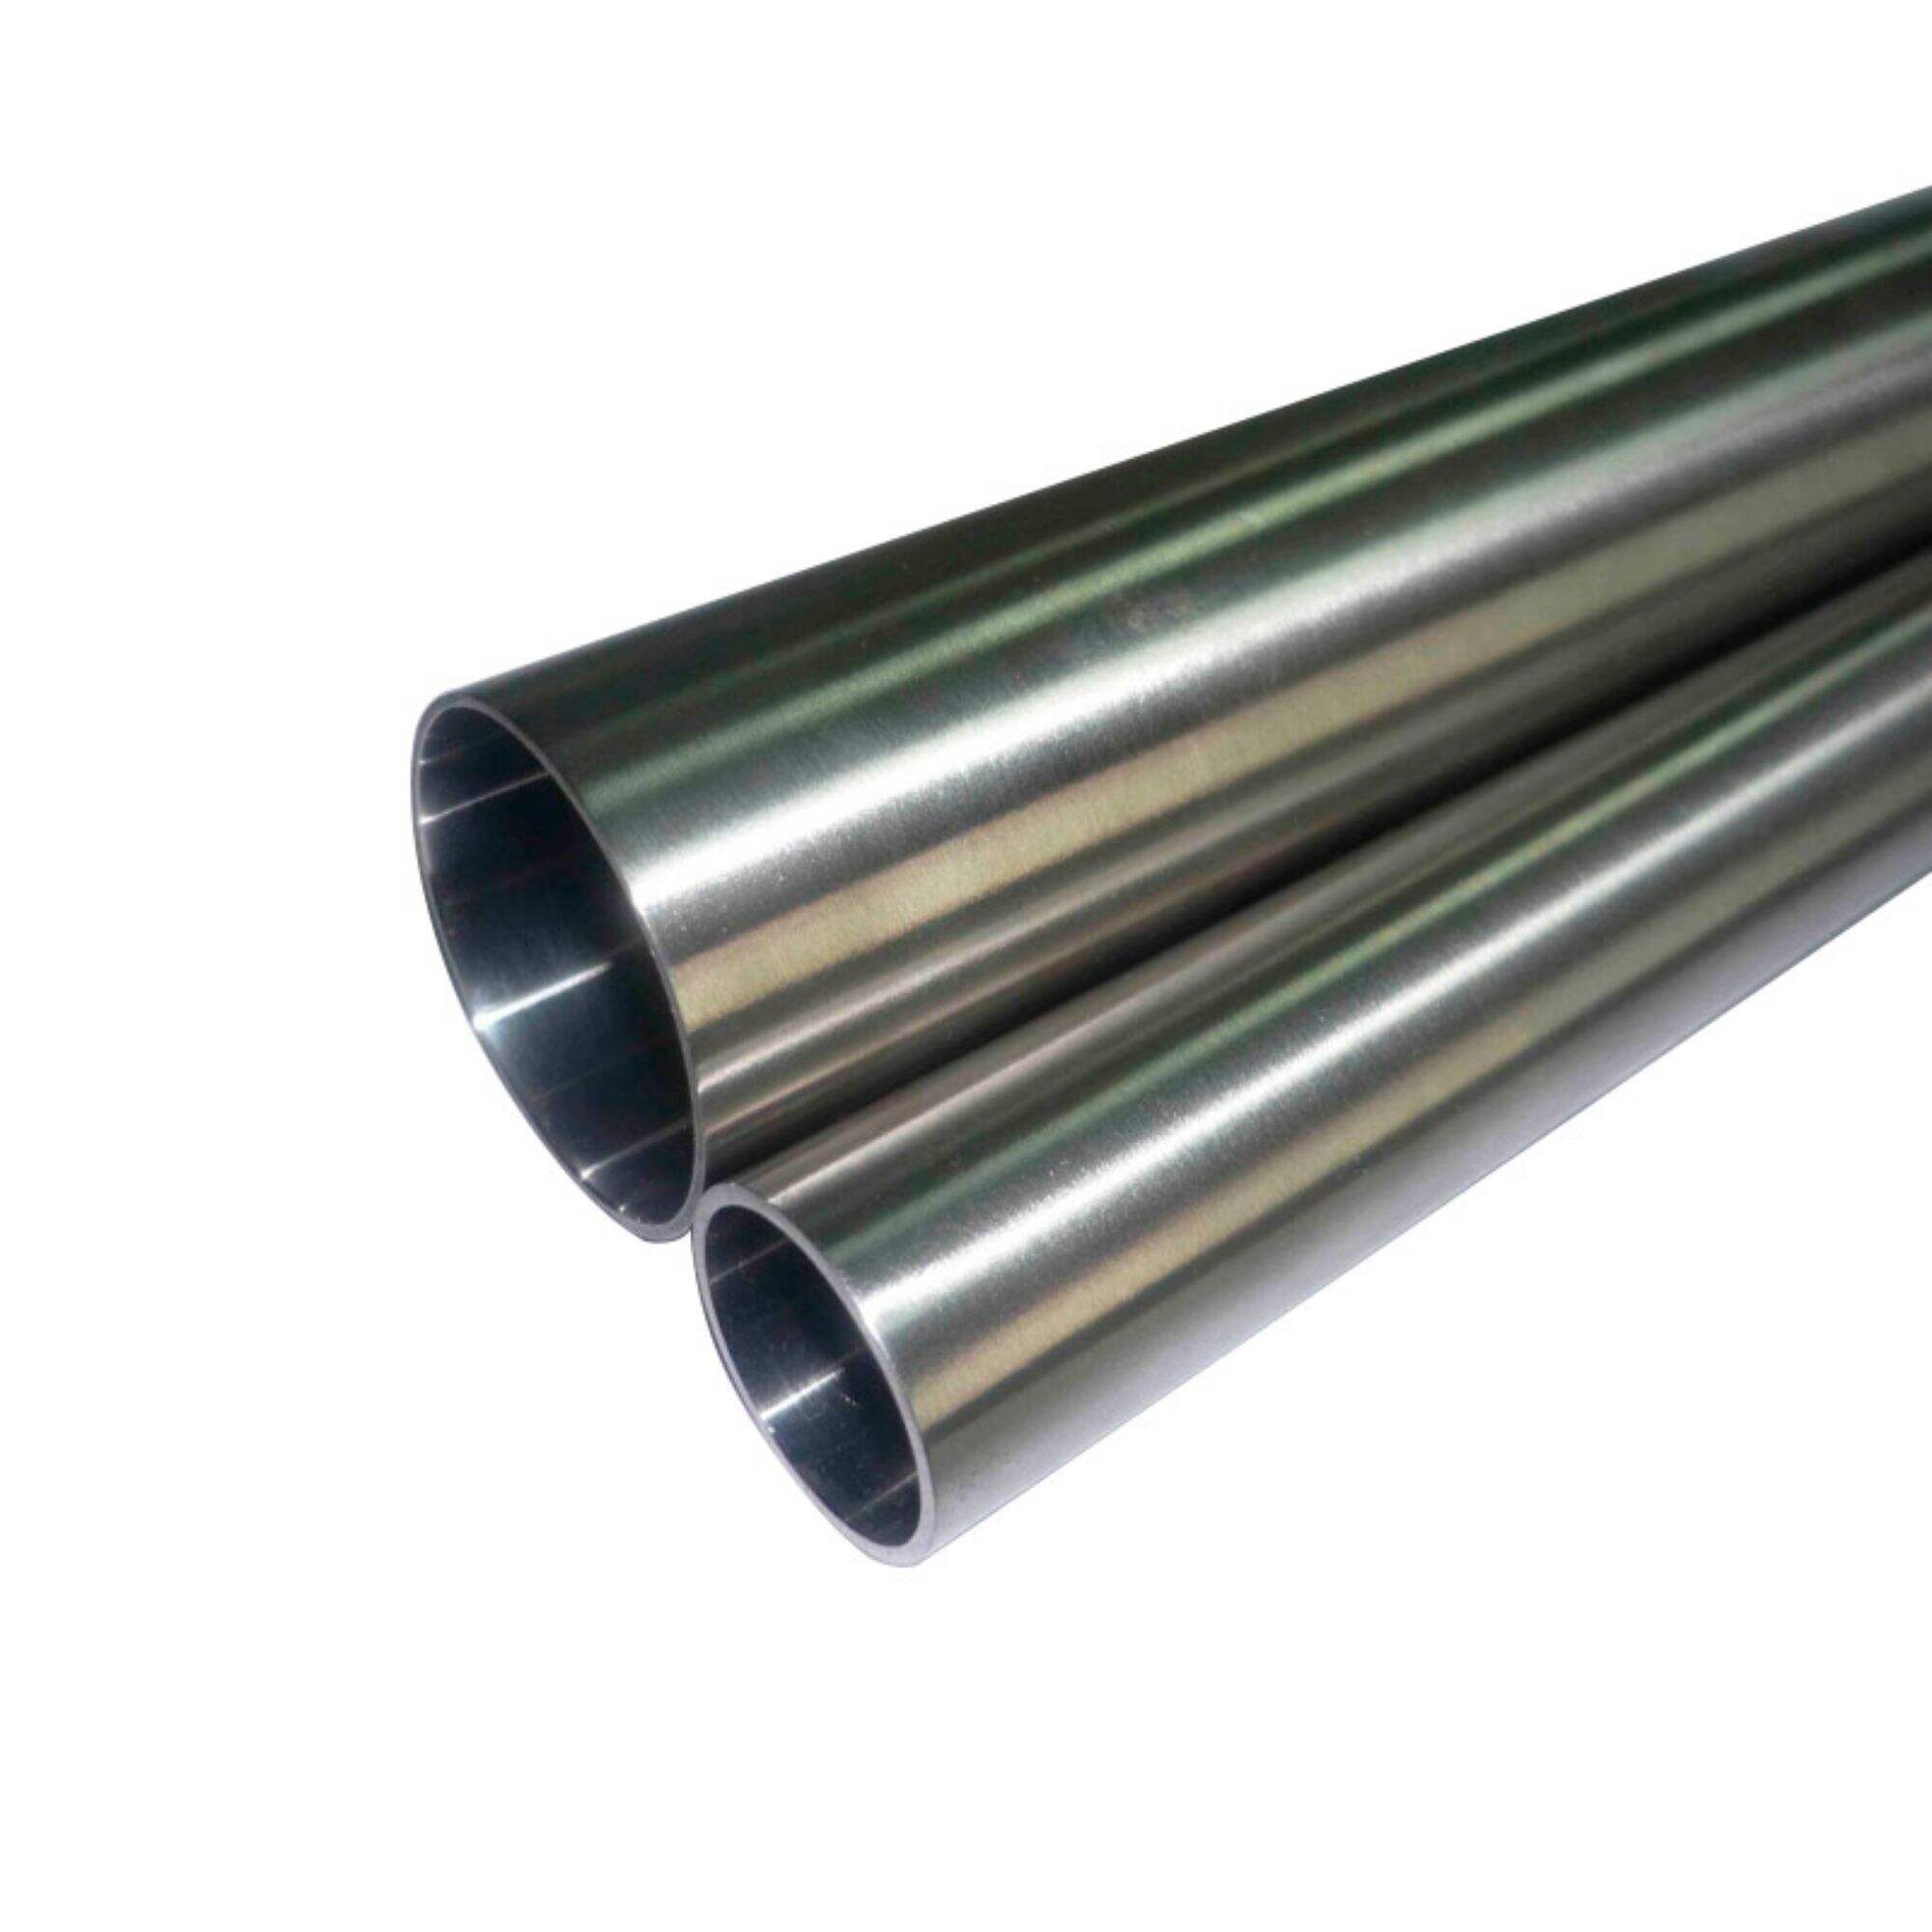 3.5 inch grade 201 304 stainless steel pipe